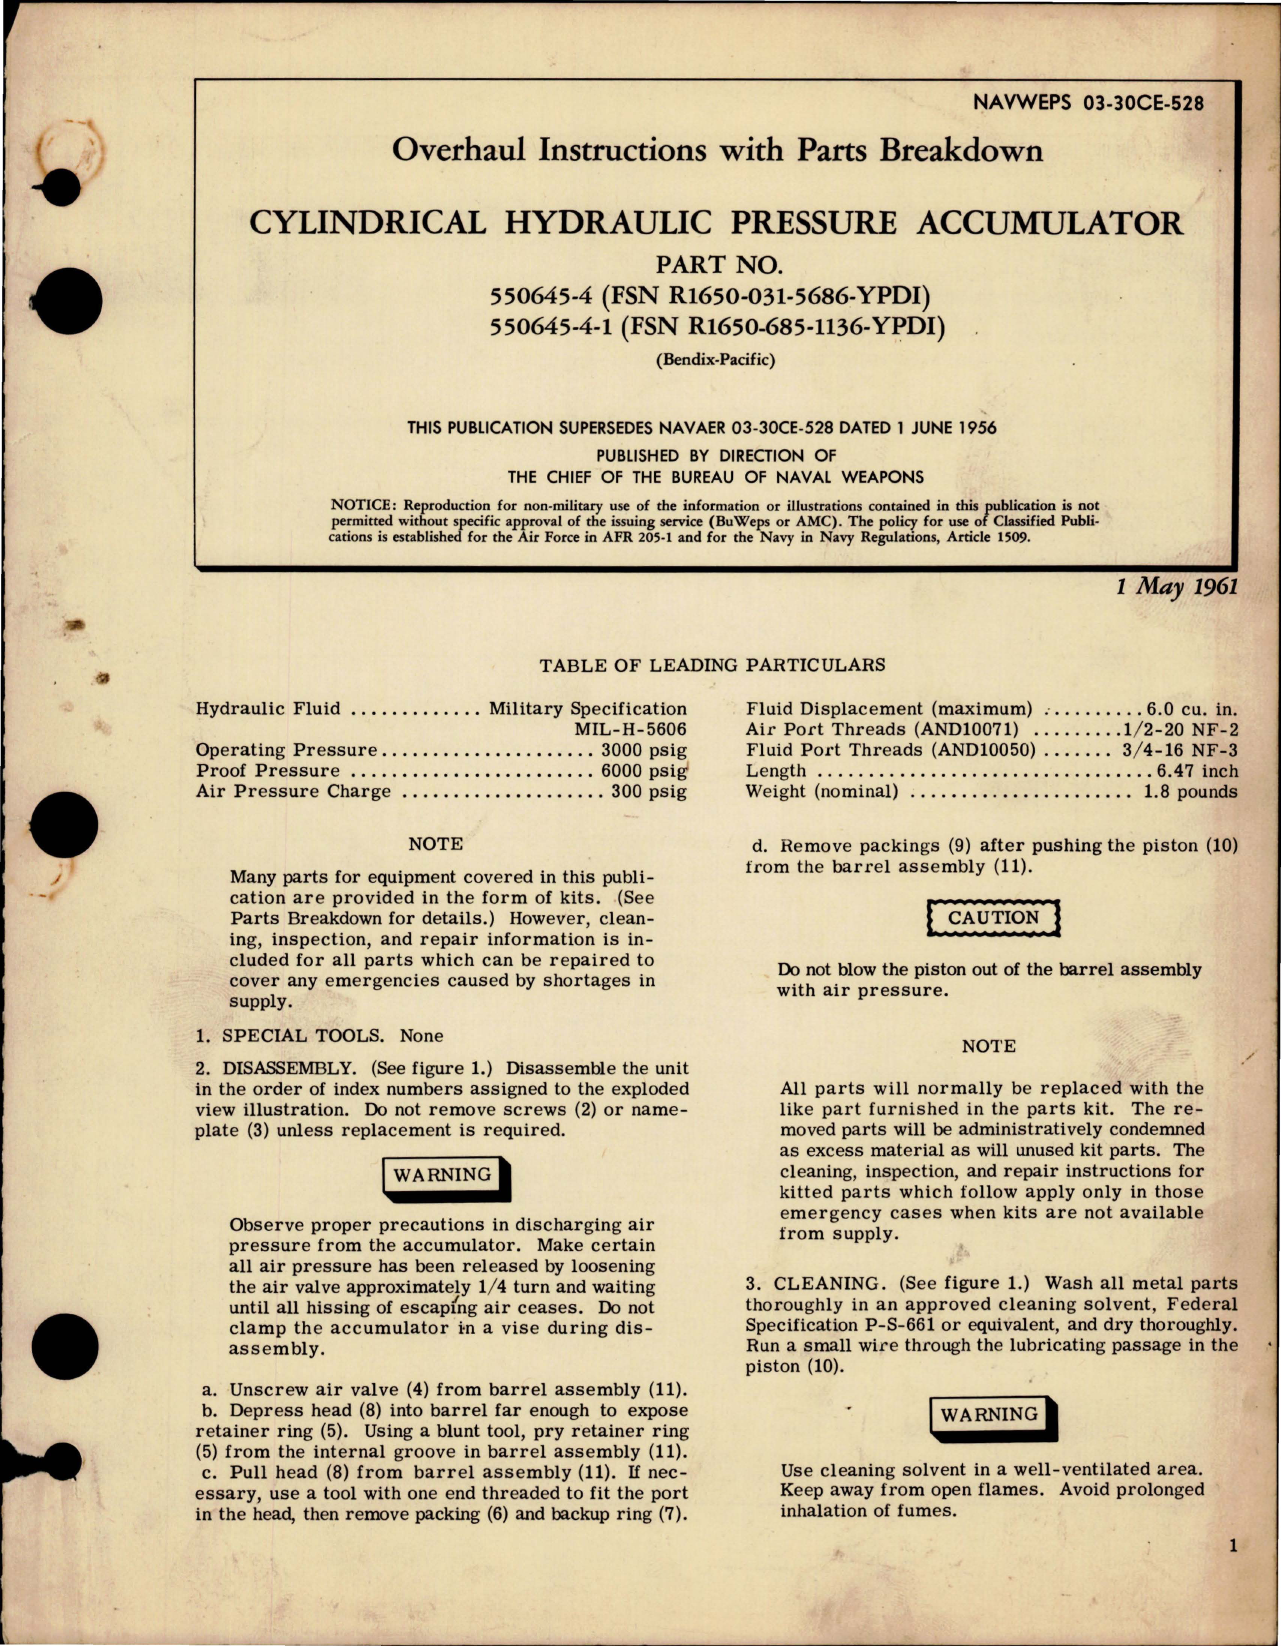 Sample page 1 from AirCorps Library document: Overhaul Instructions with Parts Breakdown for Cylindrical Hydraulic Pressure Accumulator - Parts 550645-4, 550645-4-1